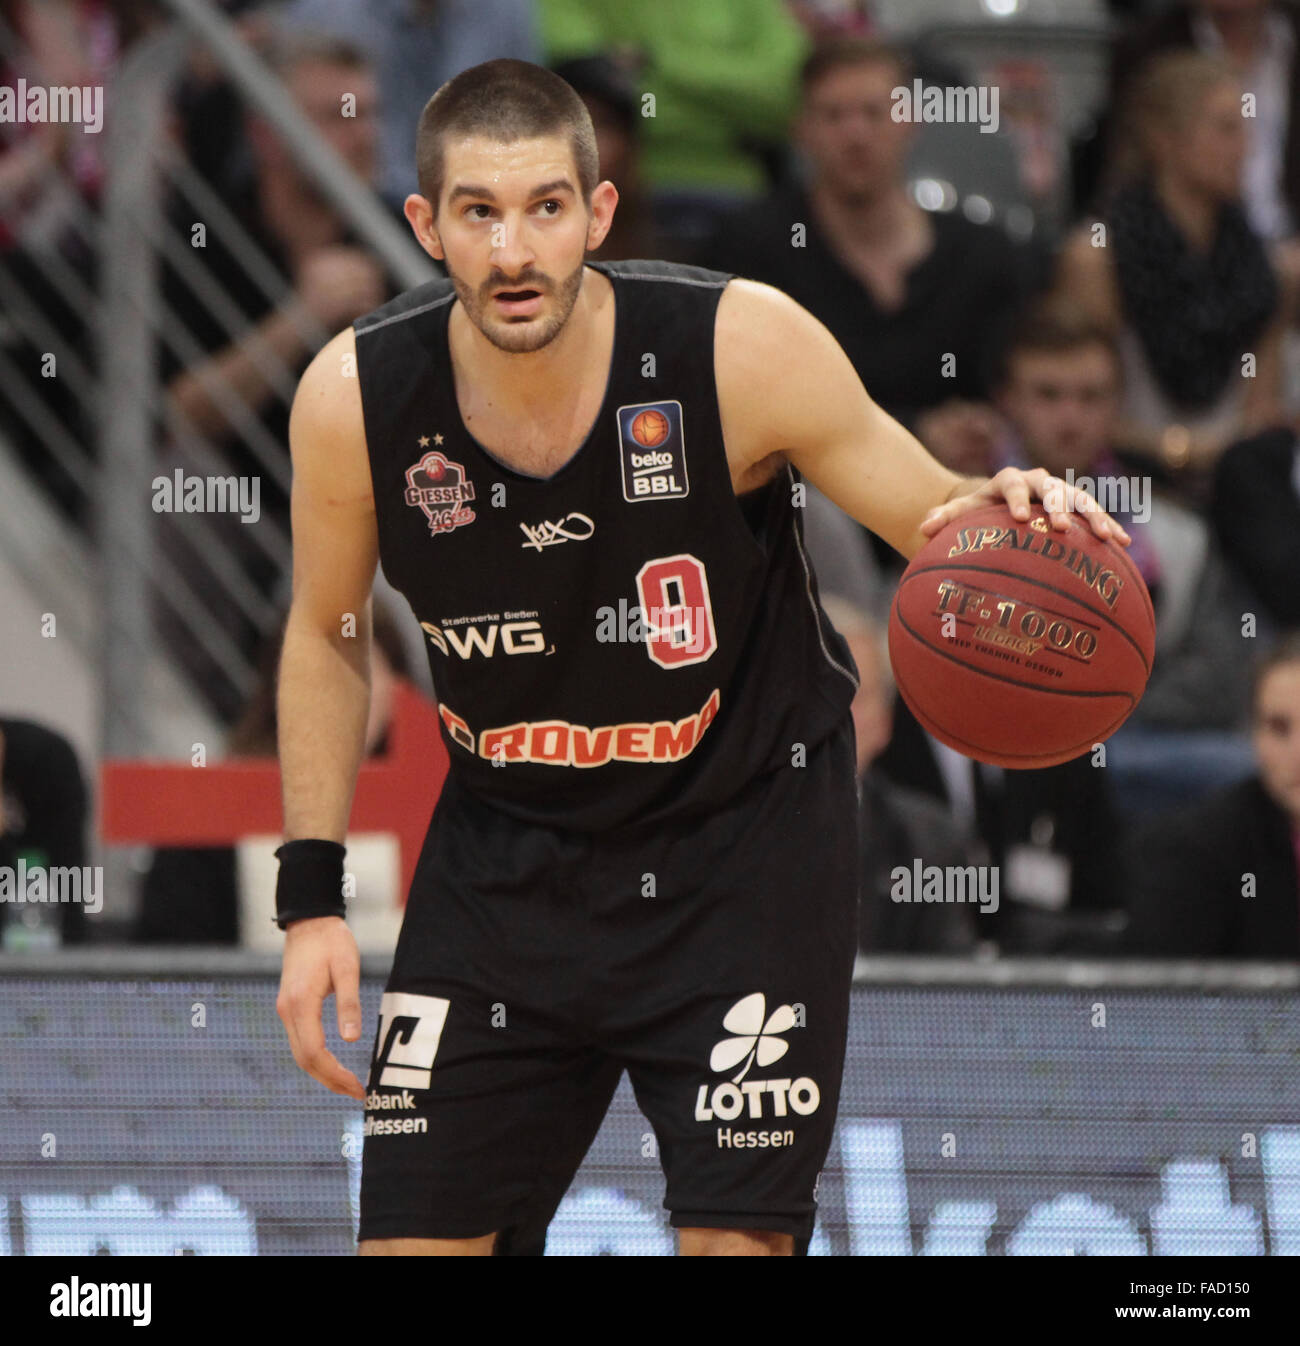 Beko Bbl High Resolution Stock Photography and Images - Alamy